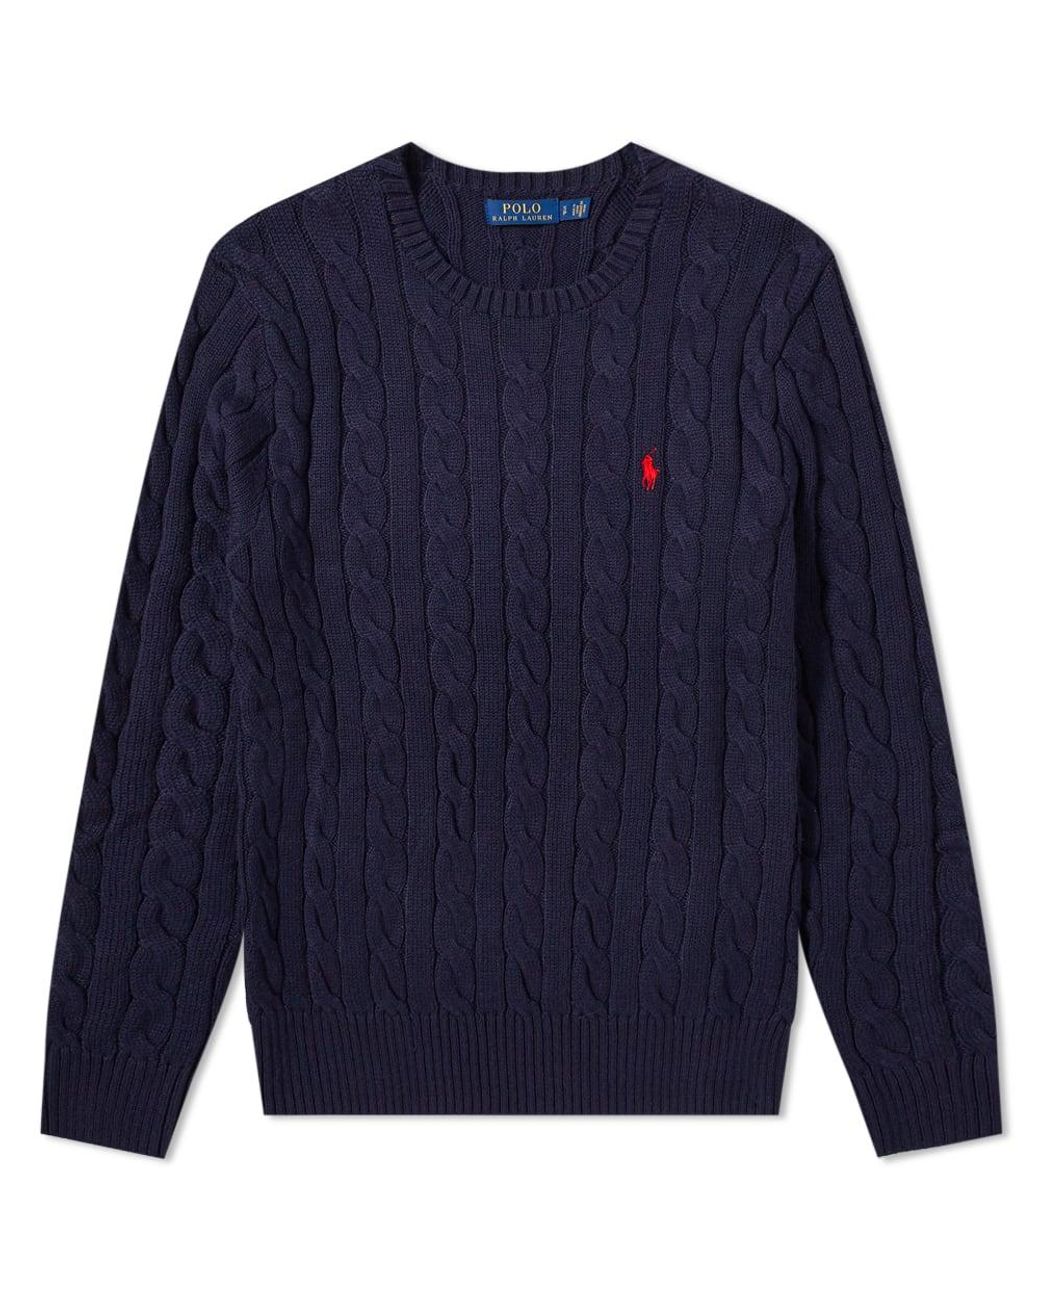 Polo Ralph Lauren Cotton Cable Crew Knit in Blue for Men - Lyst